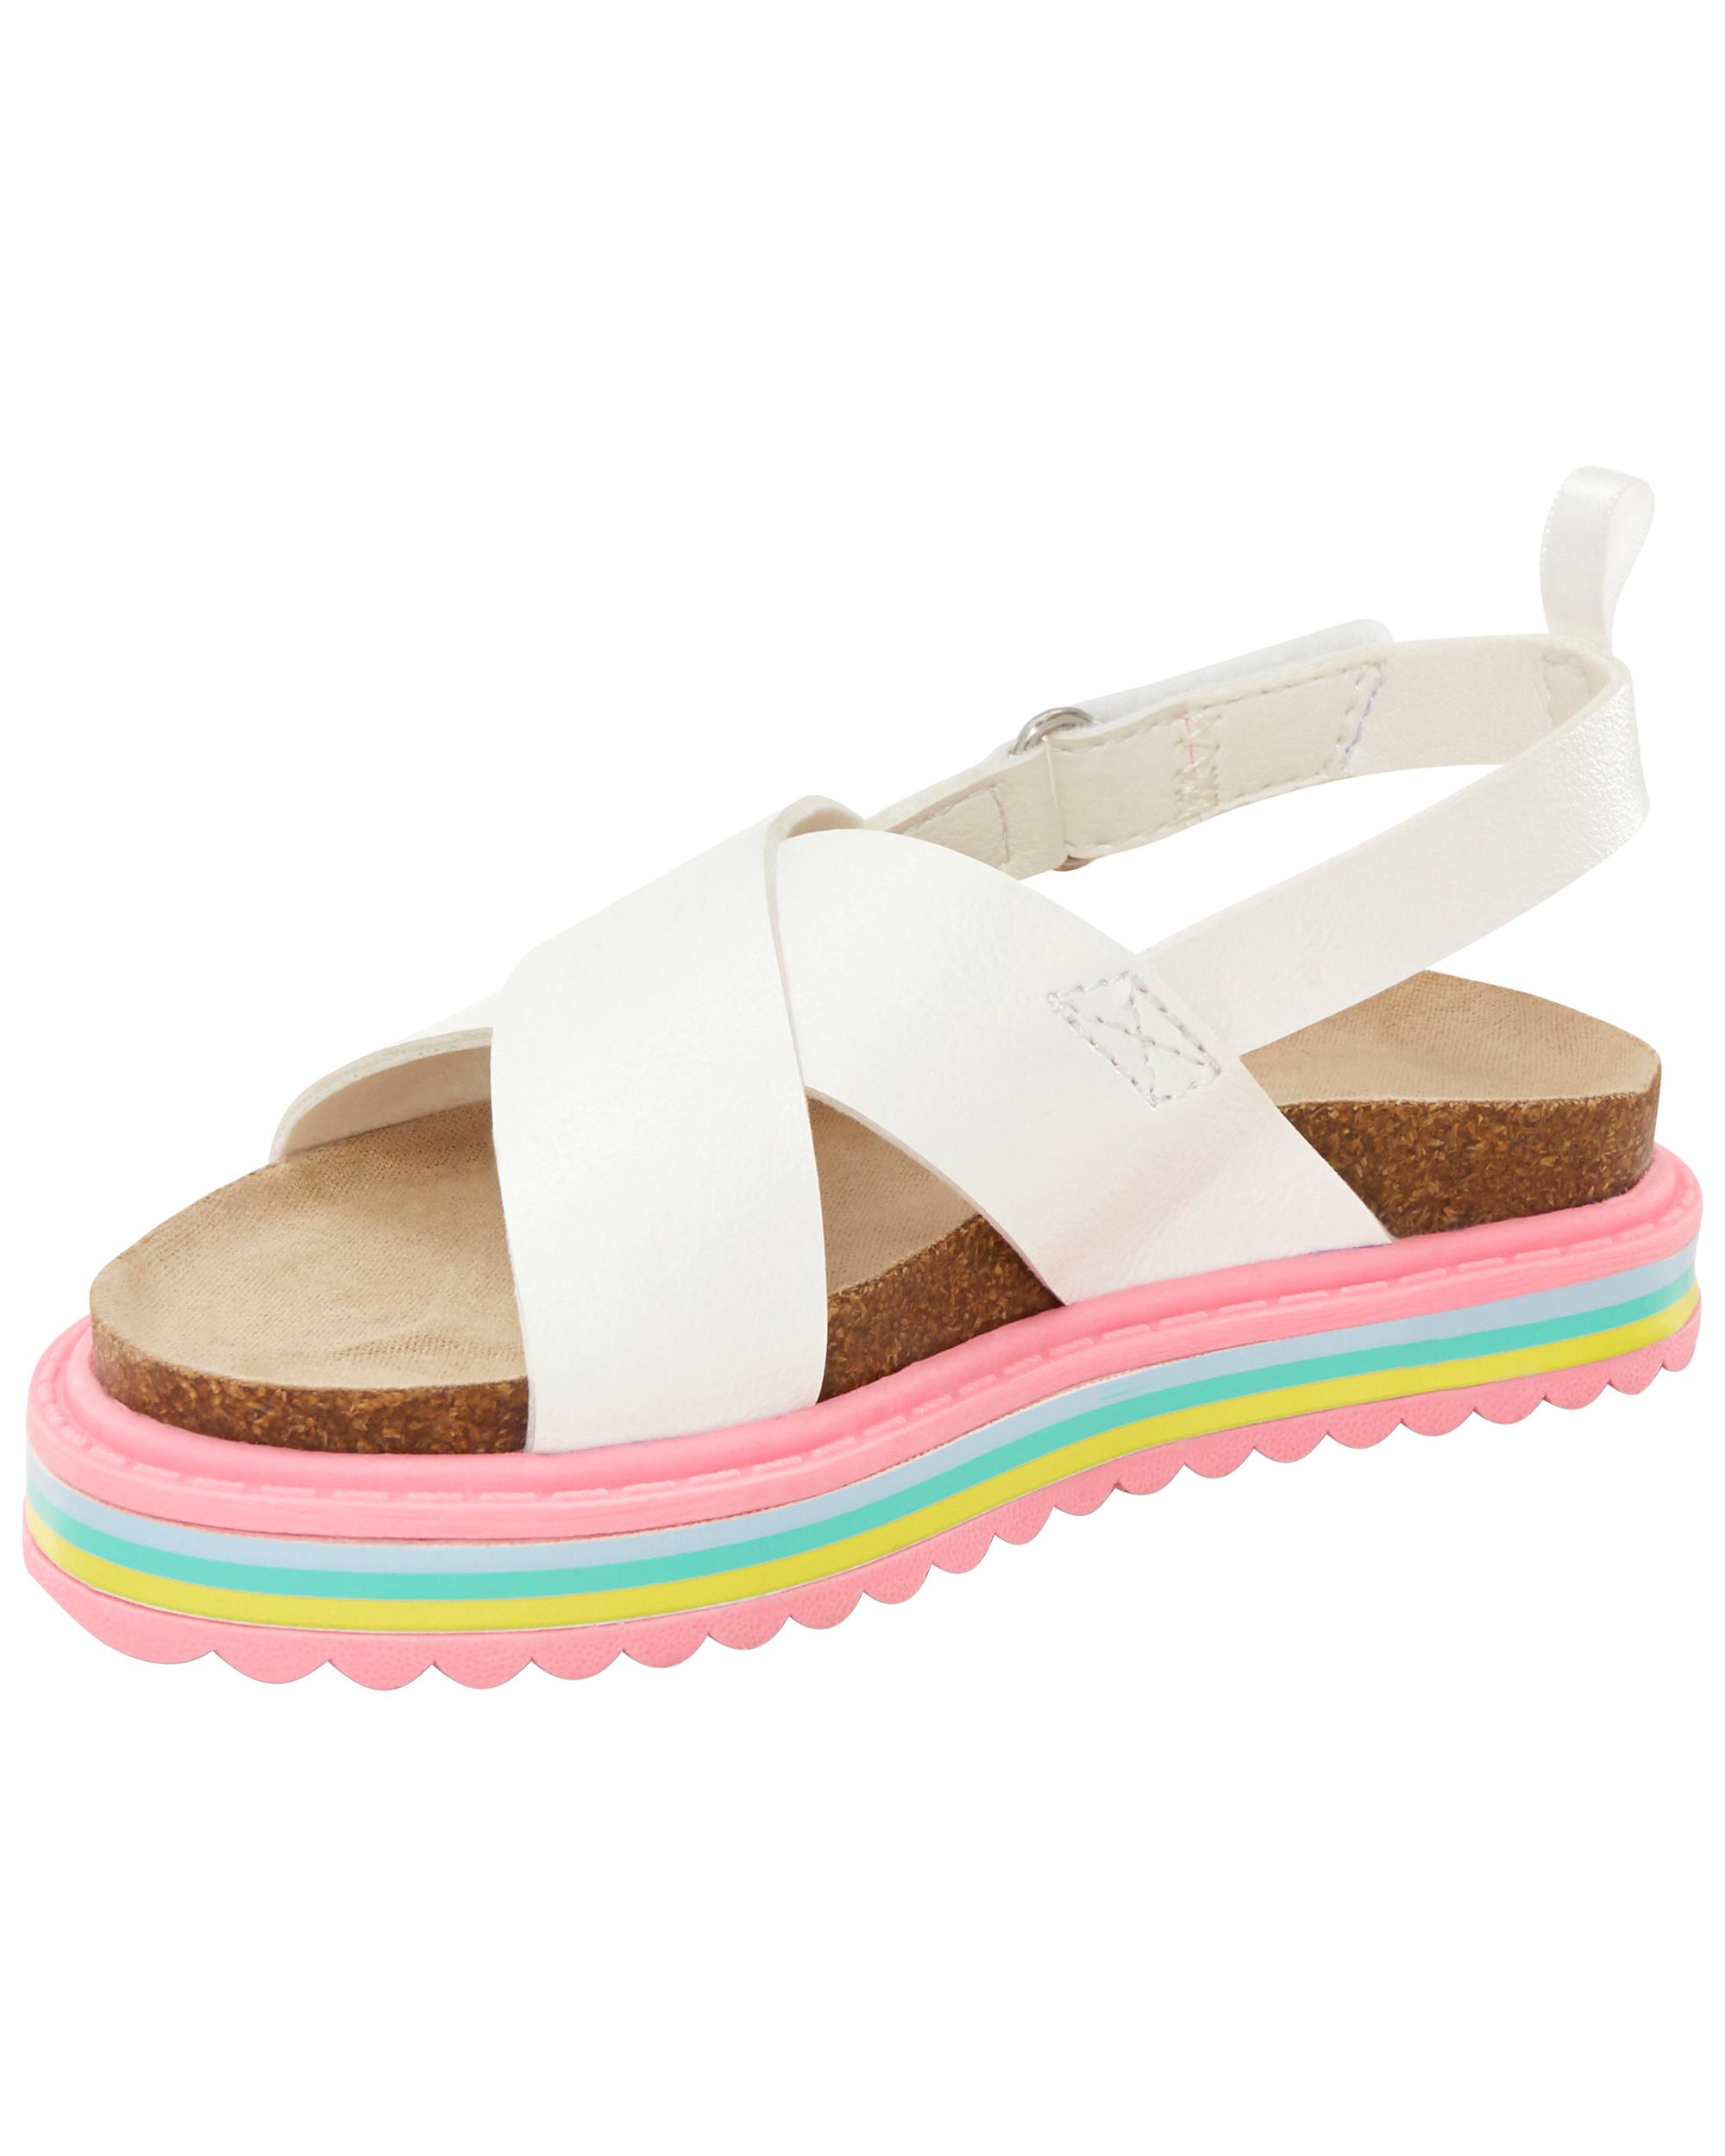 Toddler Stacked Sandals